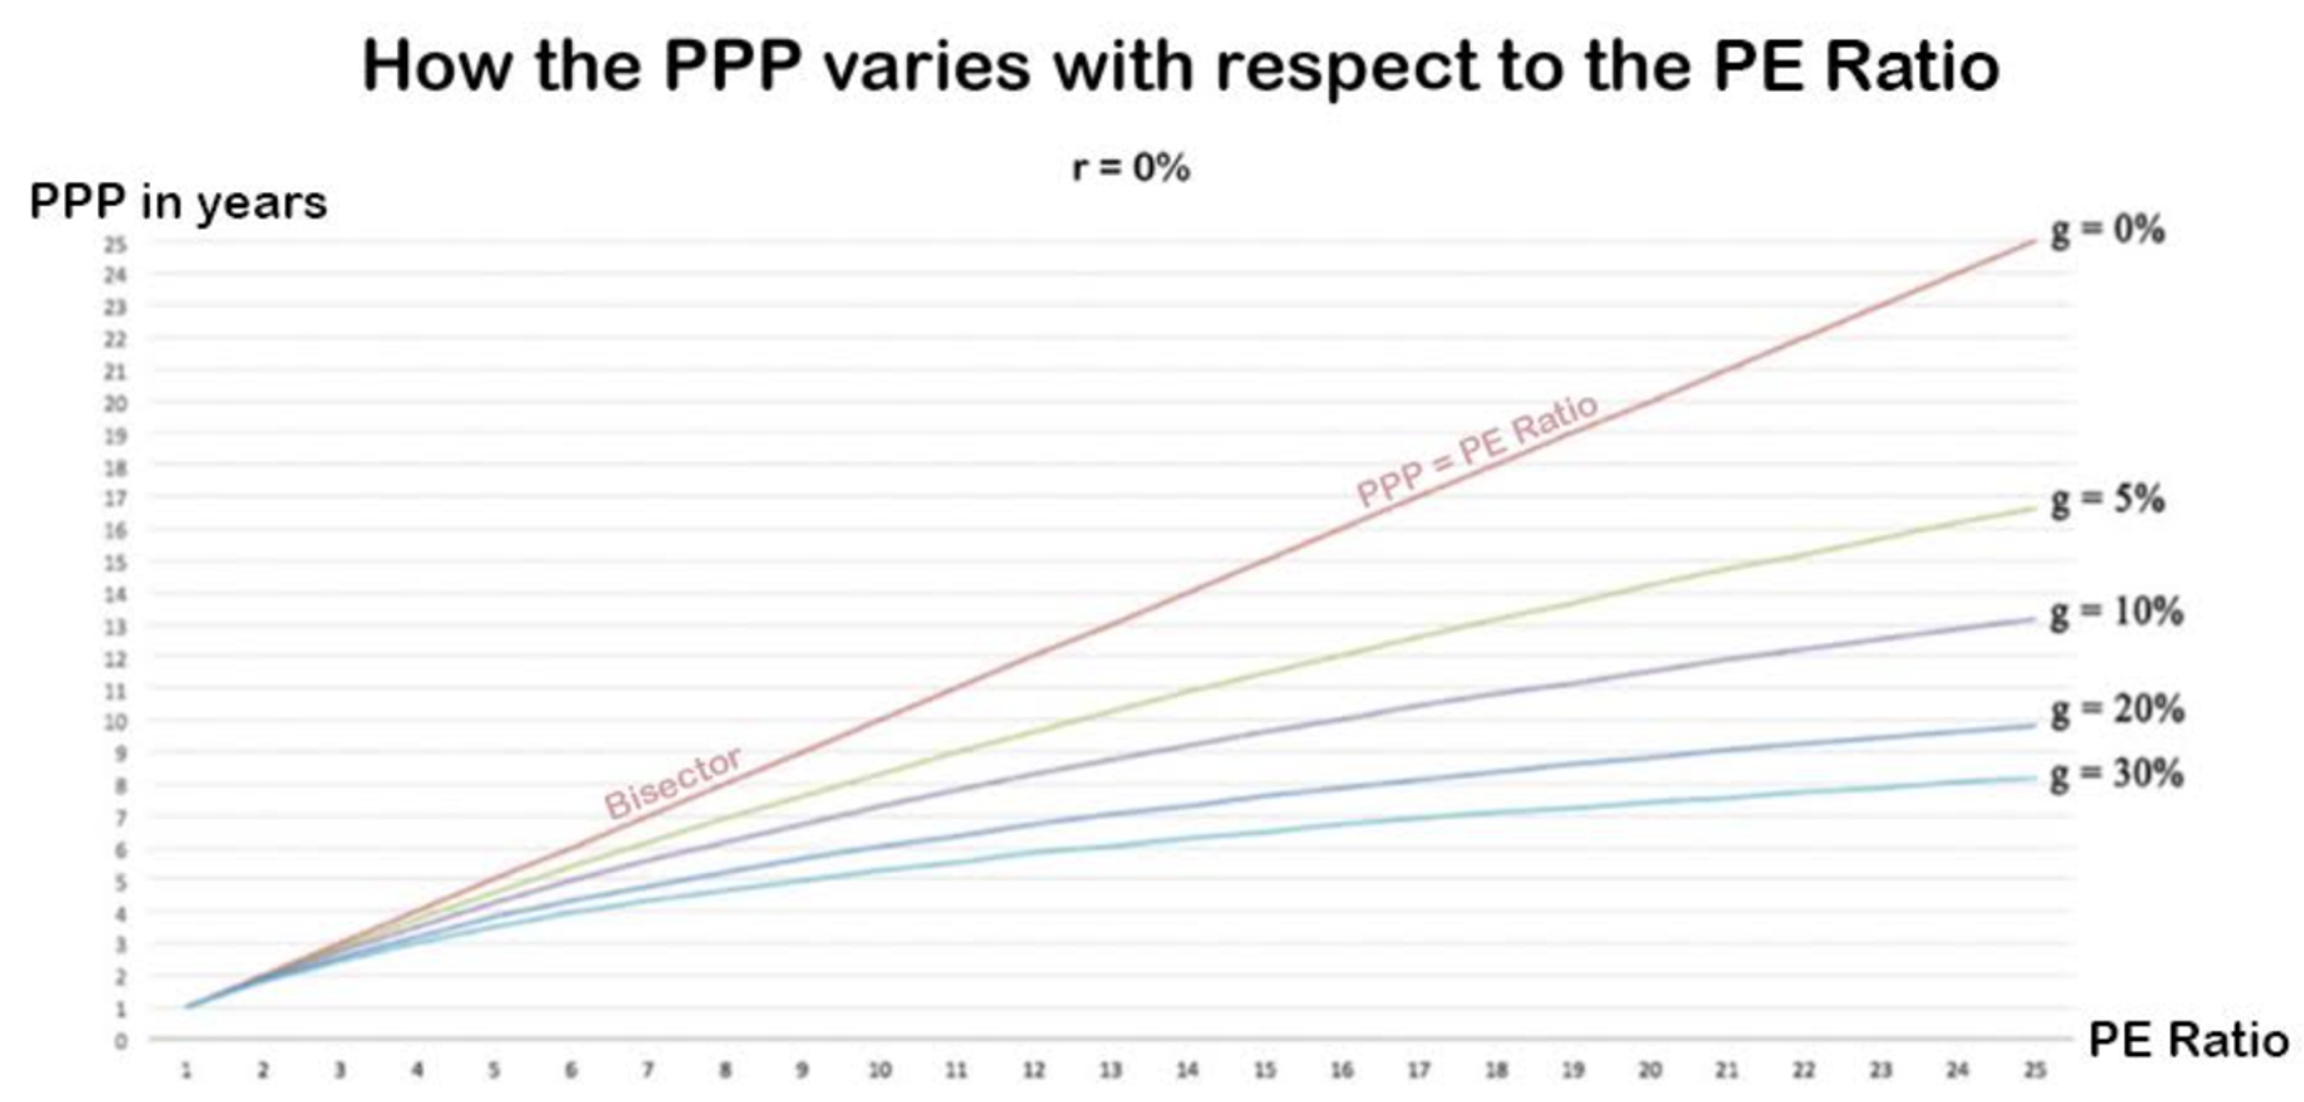 How the PPP varies with respect to the PE Ratio